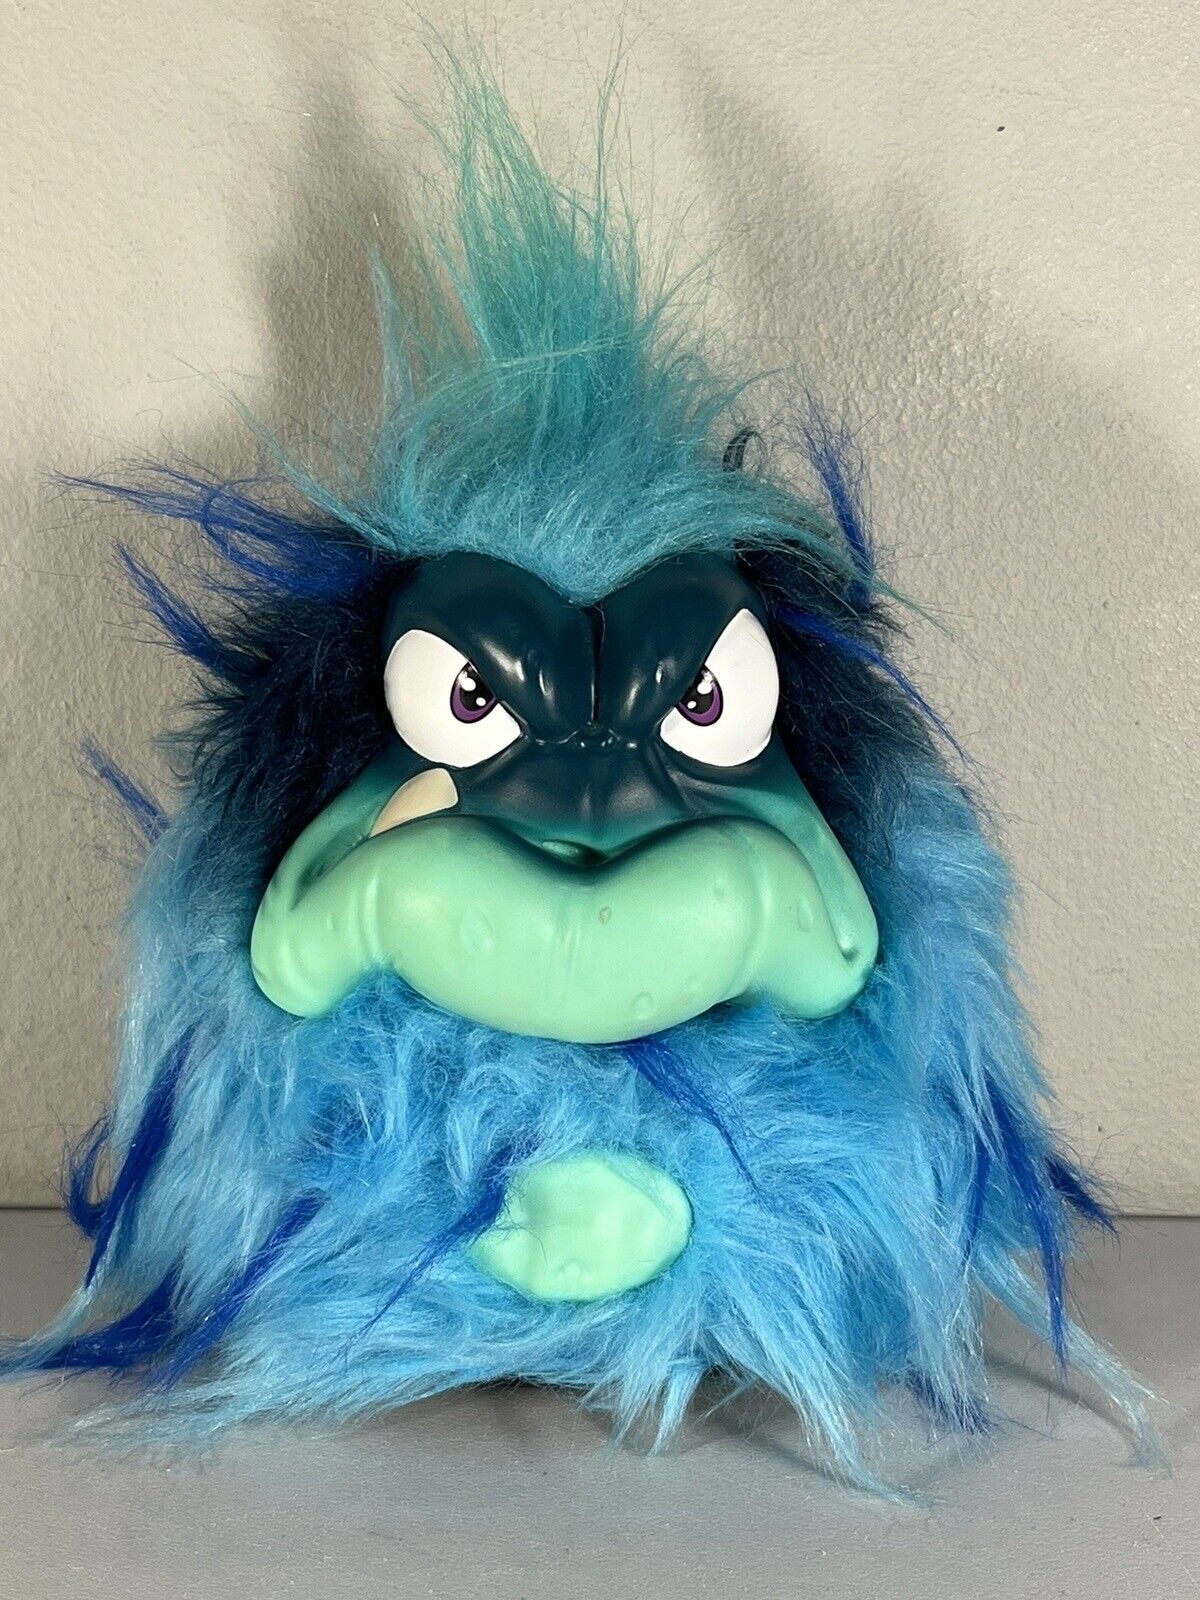 2018 Grumblies Hydro Interactive Blue Monster Plush Figure Toy - Working